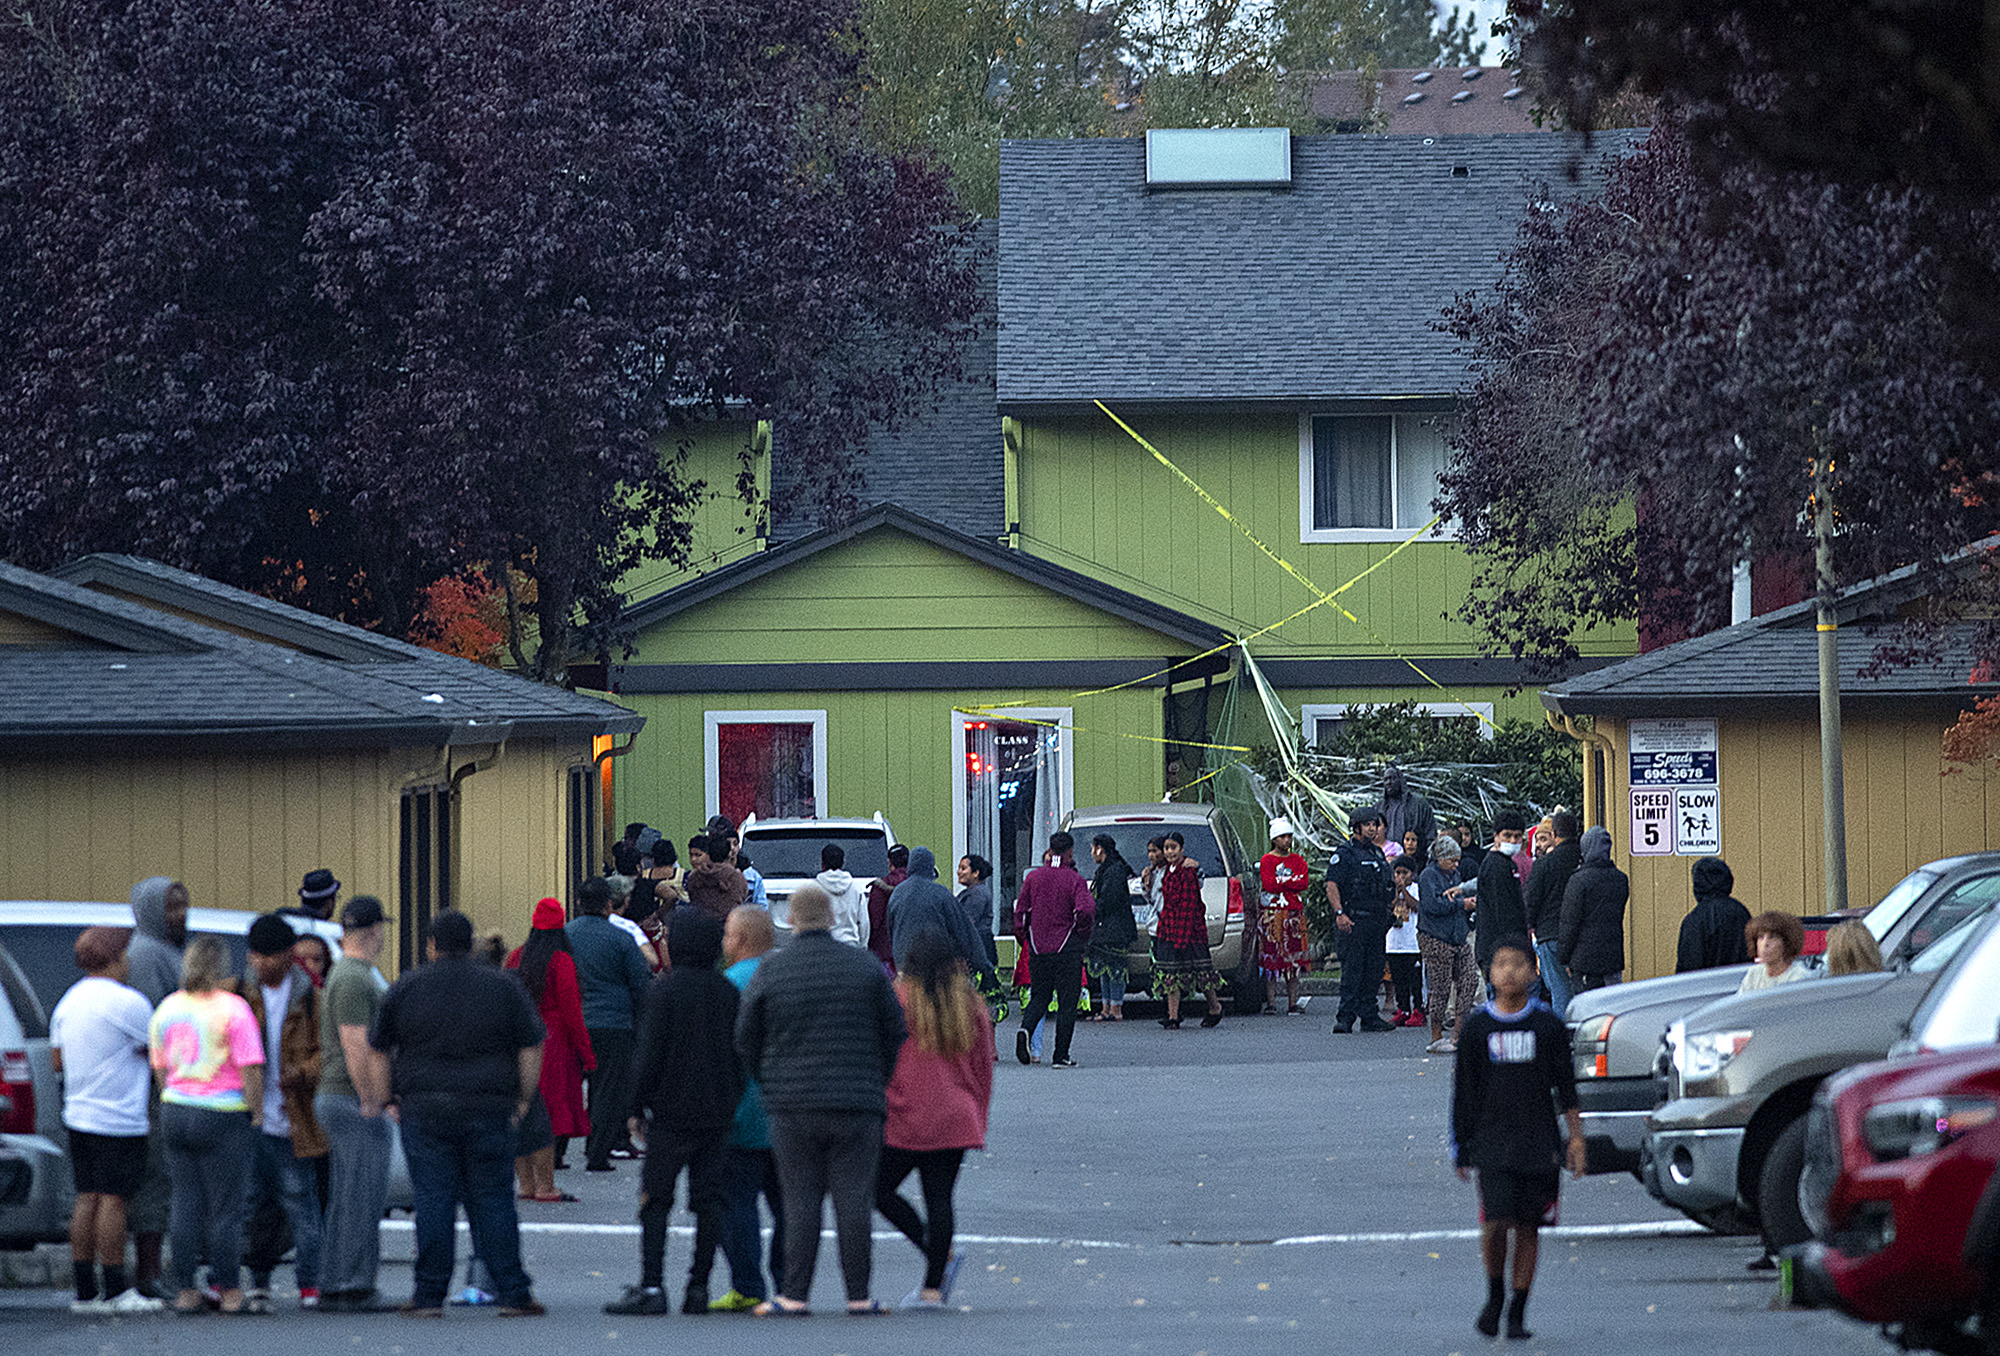 People gather at Alder Creek Apartments and Townhomes after a shooting in northeast Vancouver on Tuesday evening, Oct. 19, 2021. The apartment complex is just west of the location where Clark County sheriffs deputies fatally shot a suspect in an assault on Sunday.